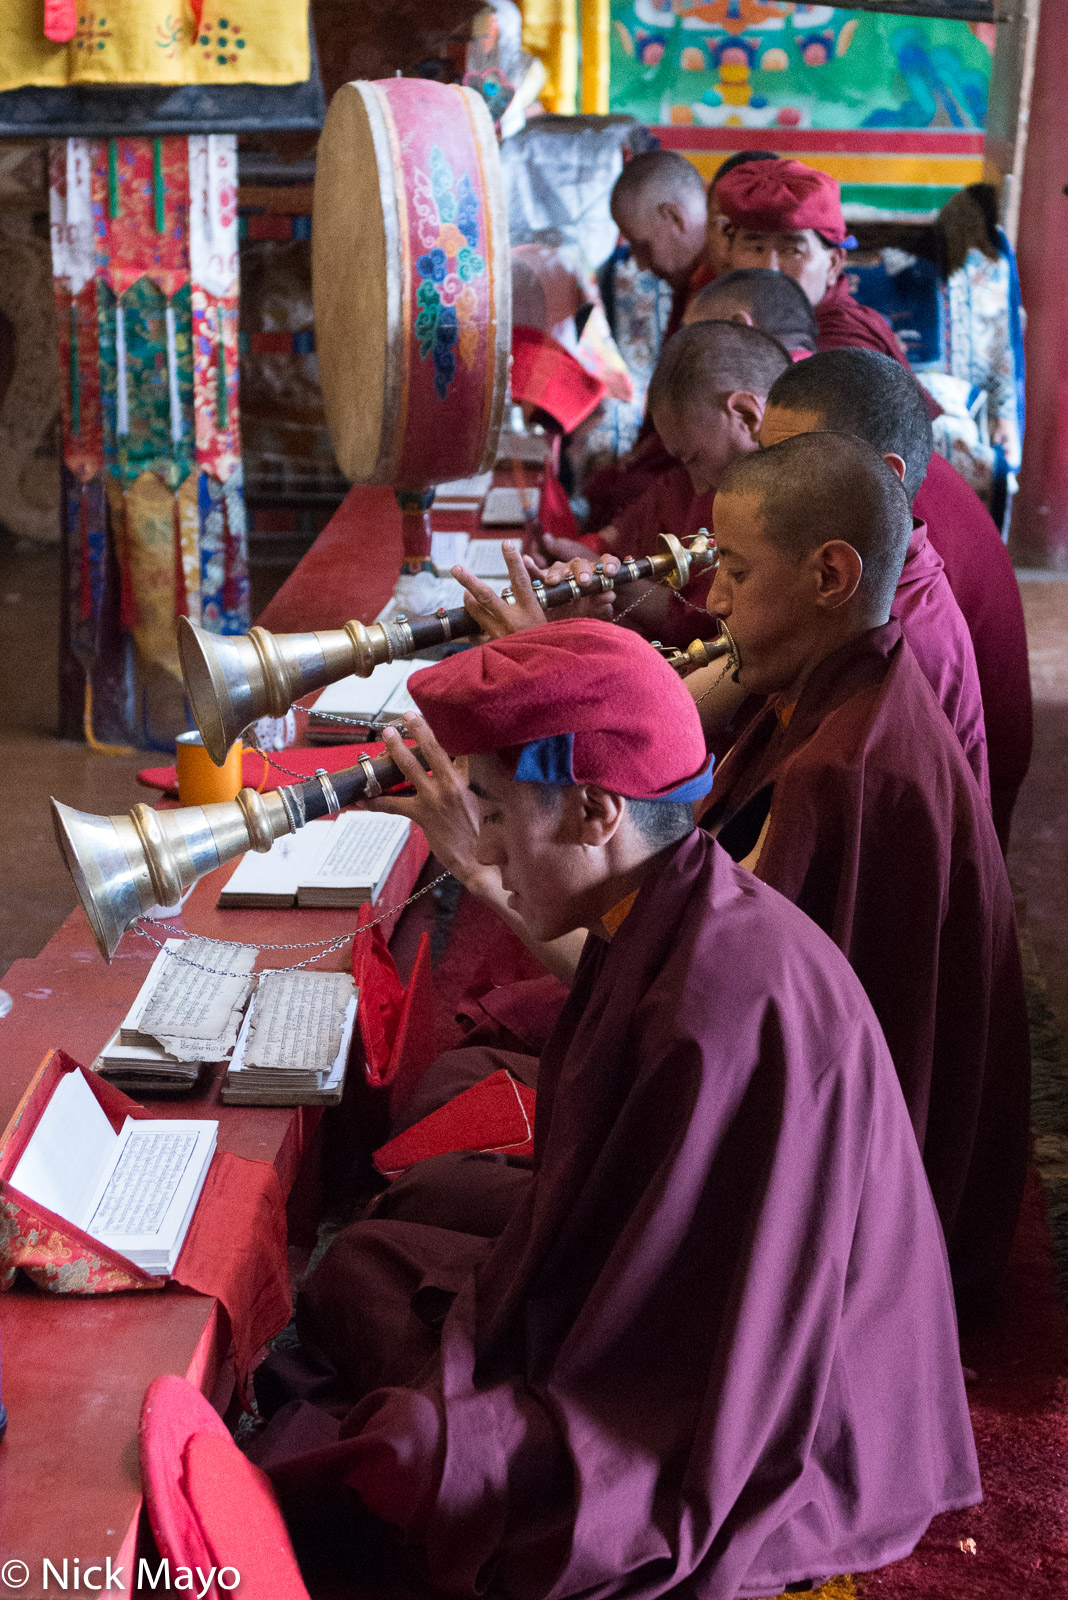 A Changpa monk in Korzok monastery chanting from a scripture while others play horns and a drum.